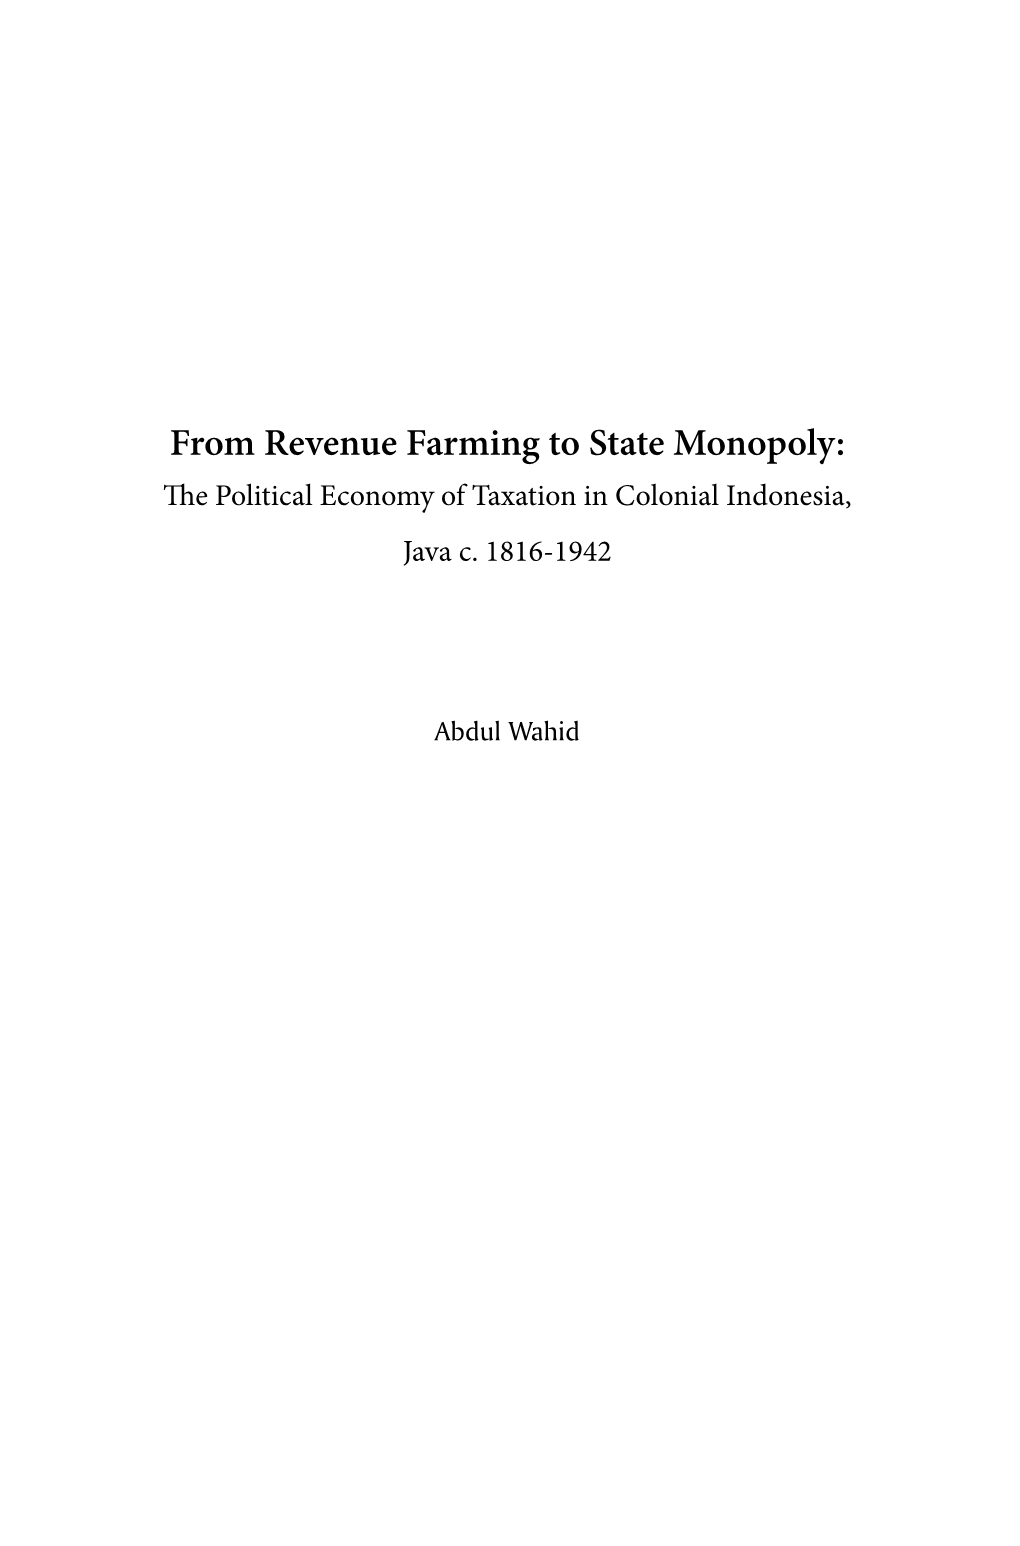 From Revenue Farming to State Monopoly: the Political Economy of Taxation in Colonial Indonesia, Java C